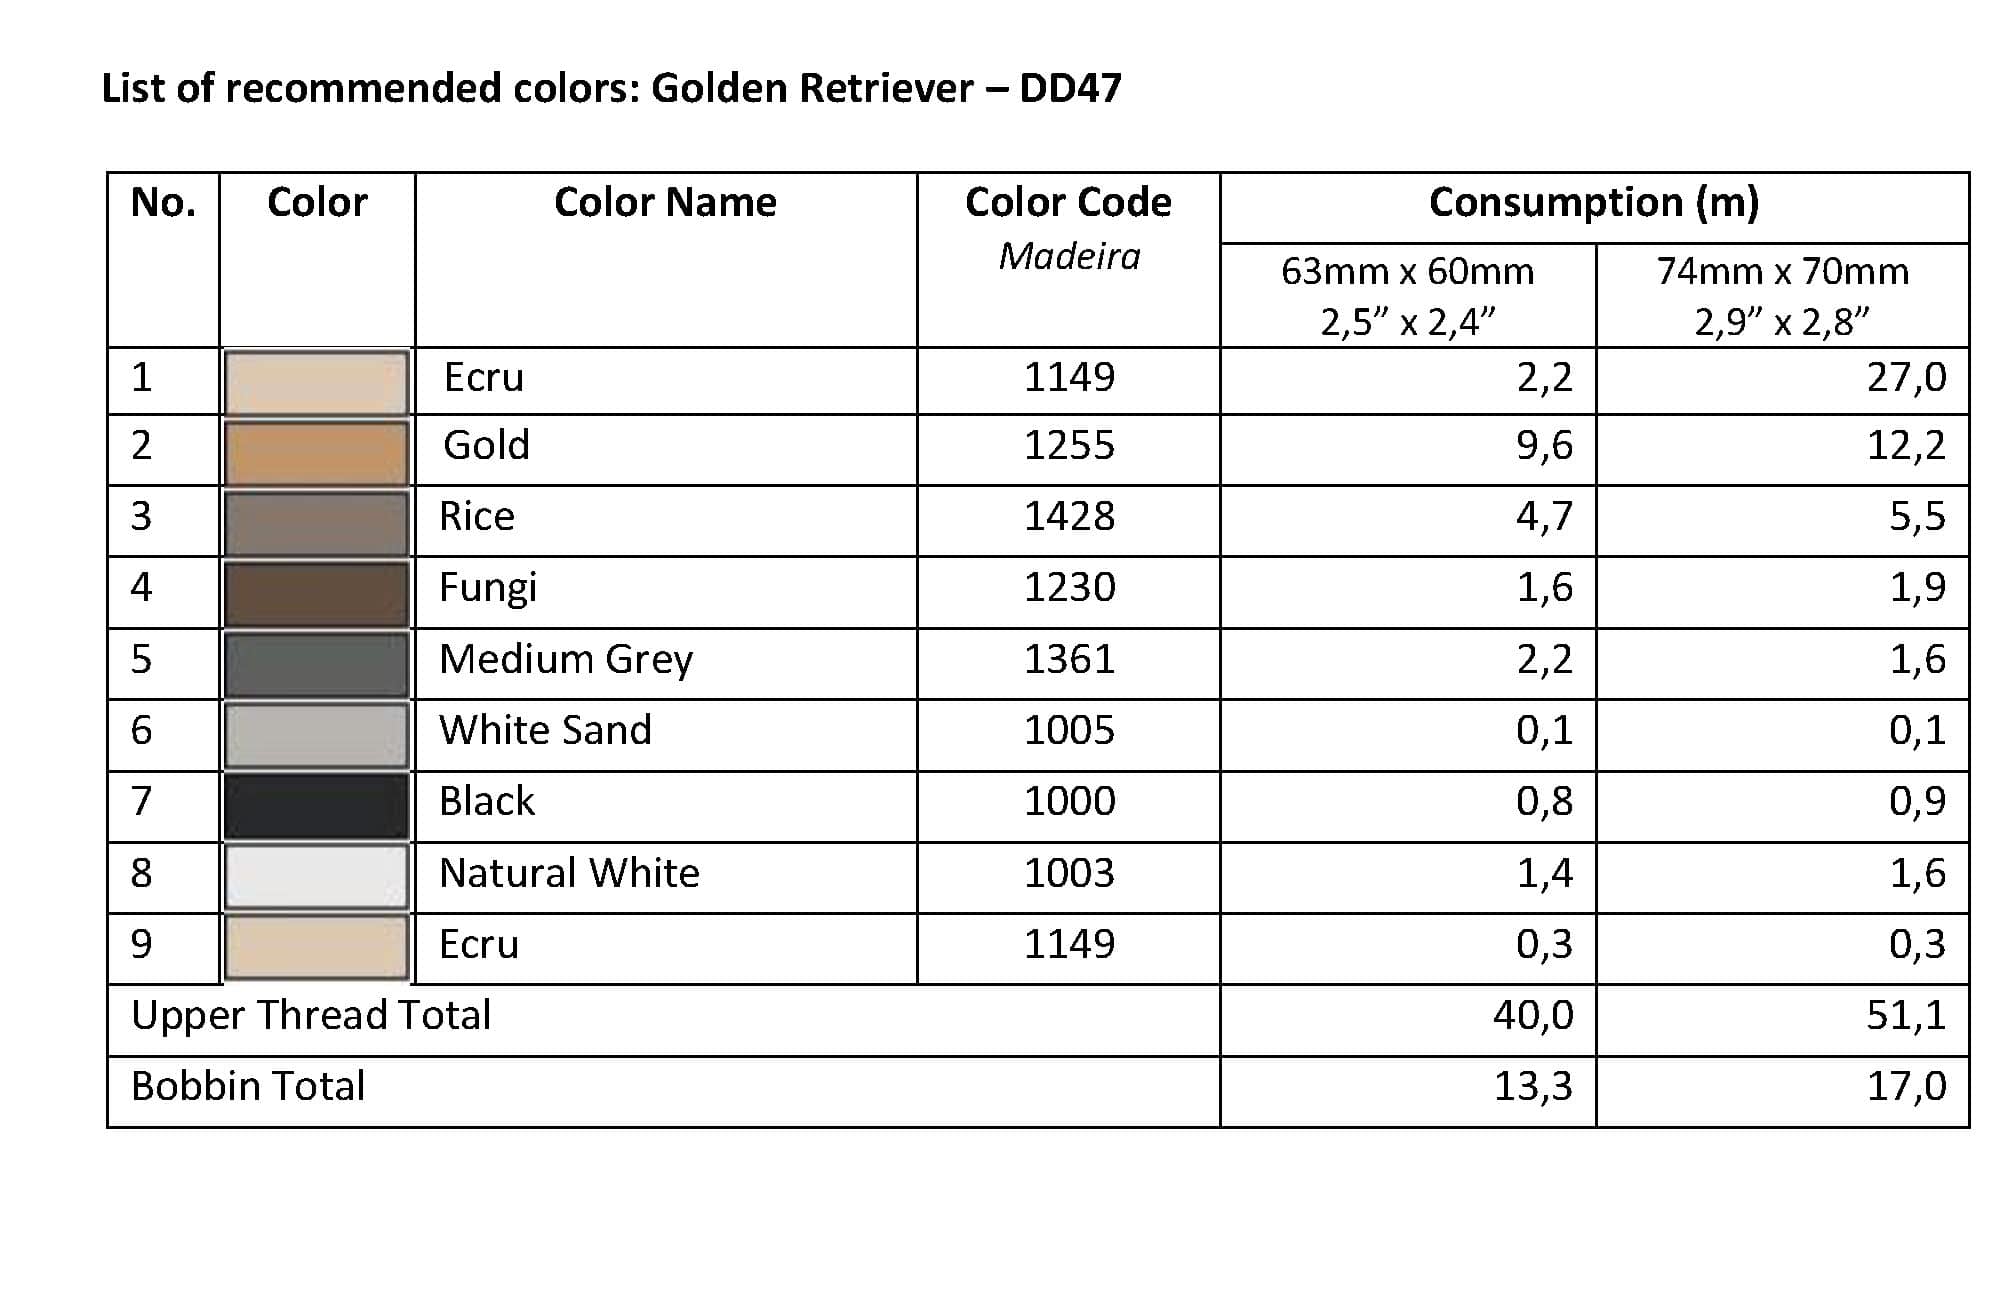 List of Recommended Colors - Golden Retriever DD47